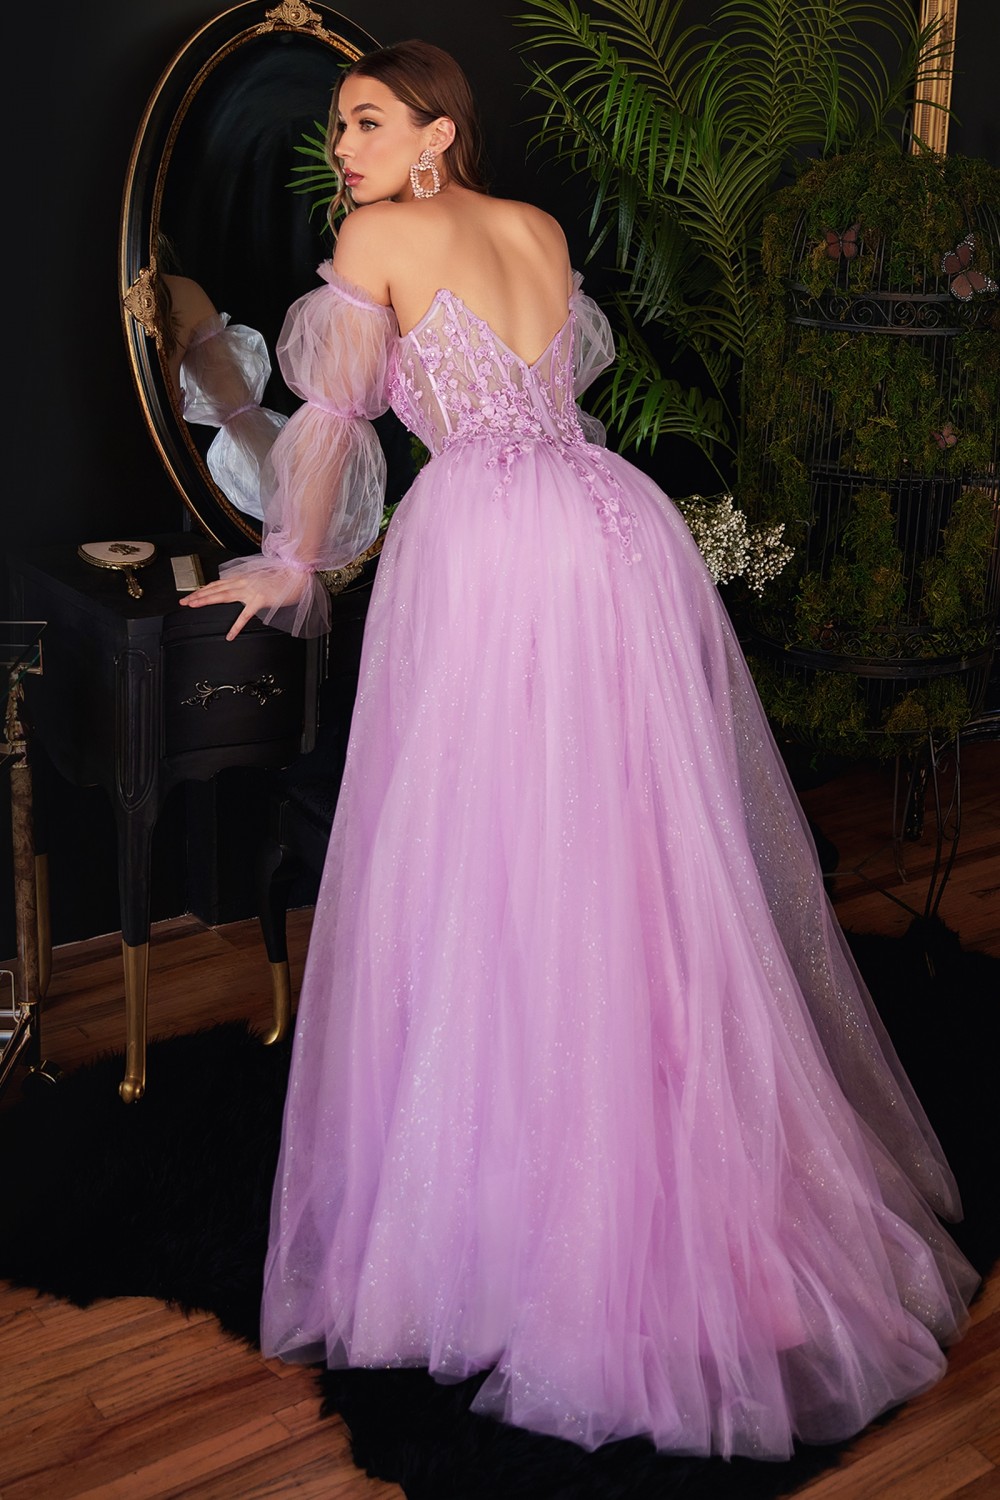 Strapless layered lace tulle gown with removable puff sleeves.